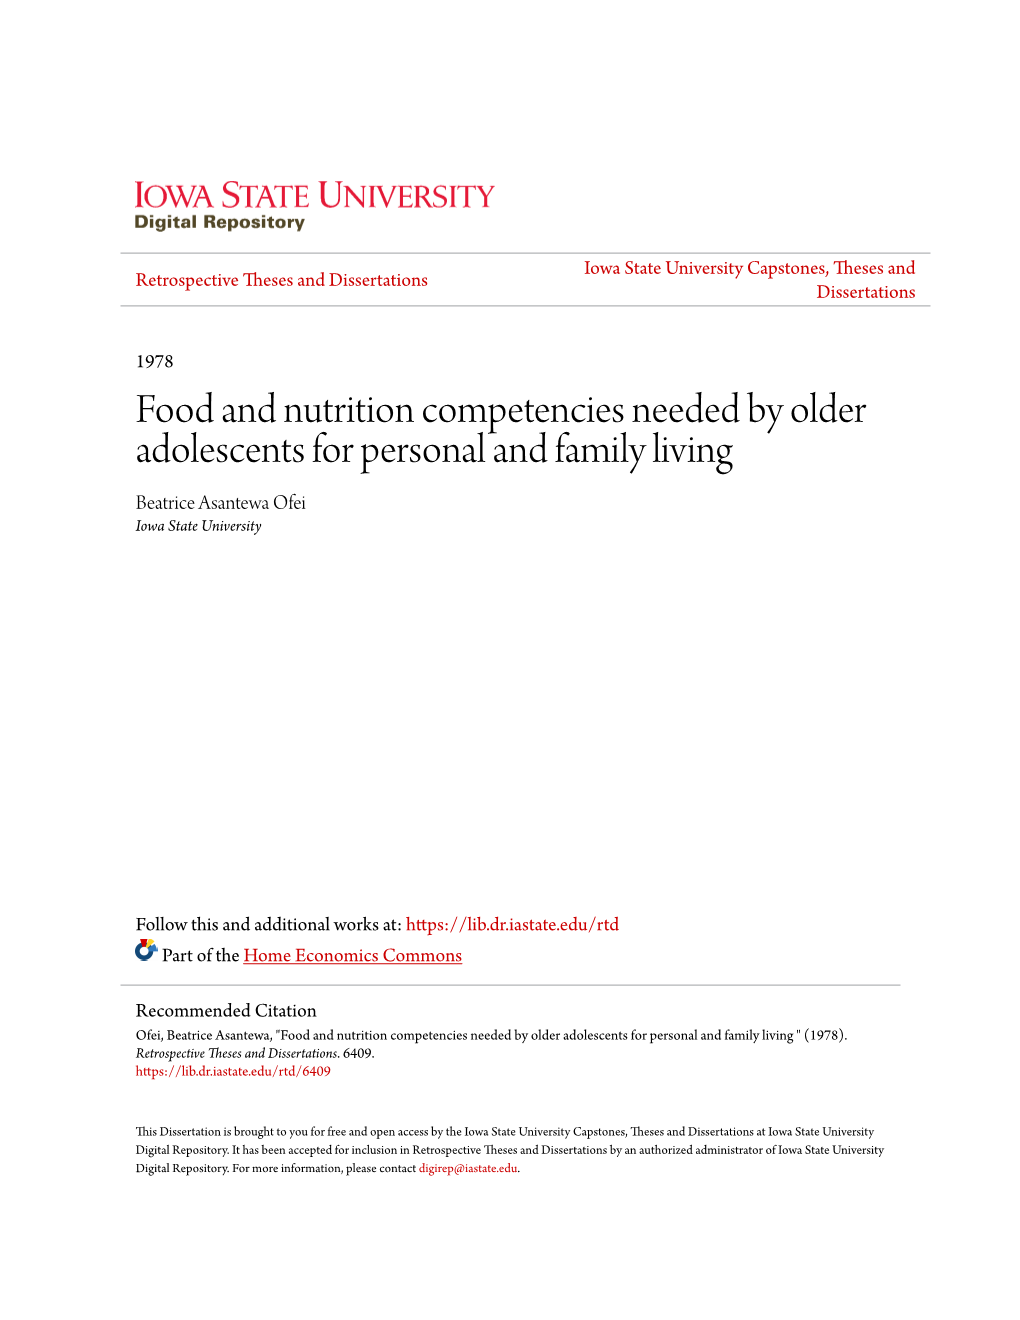 Food and Nutrition Competencies Needed by Older Adolescents for Personal and Family Living Beatrice Asantewa Ofei Iowa State University